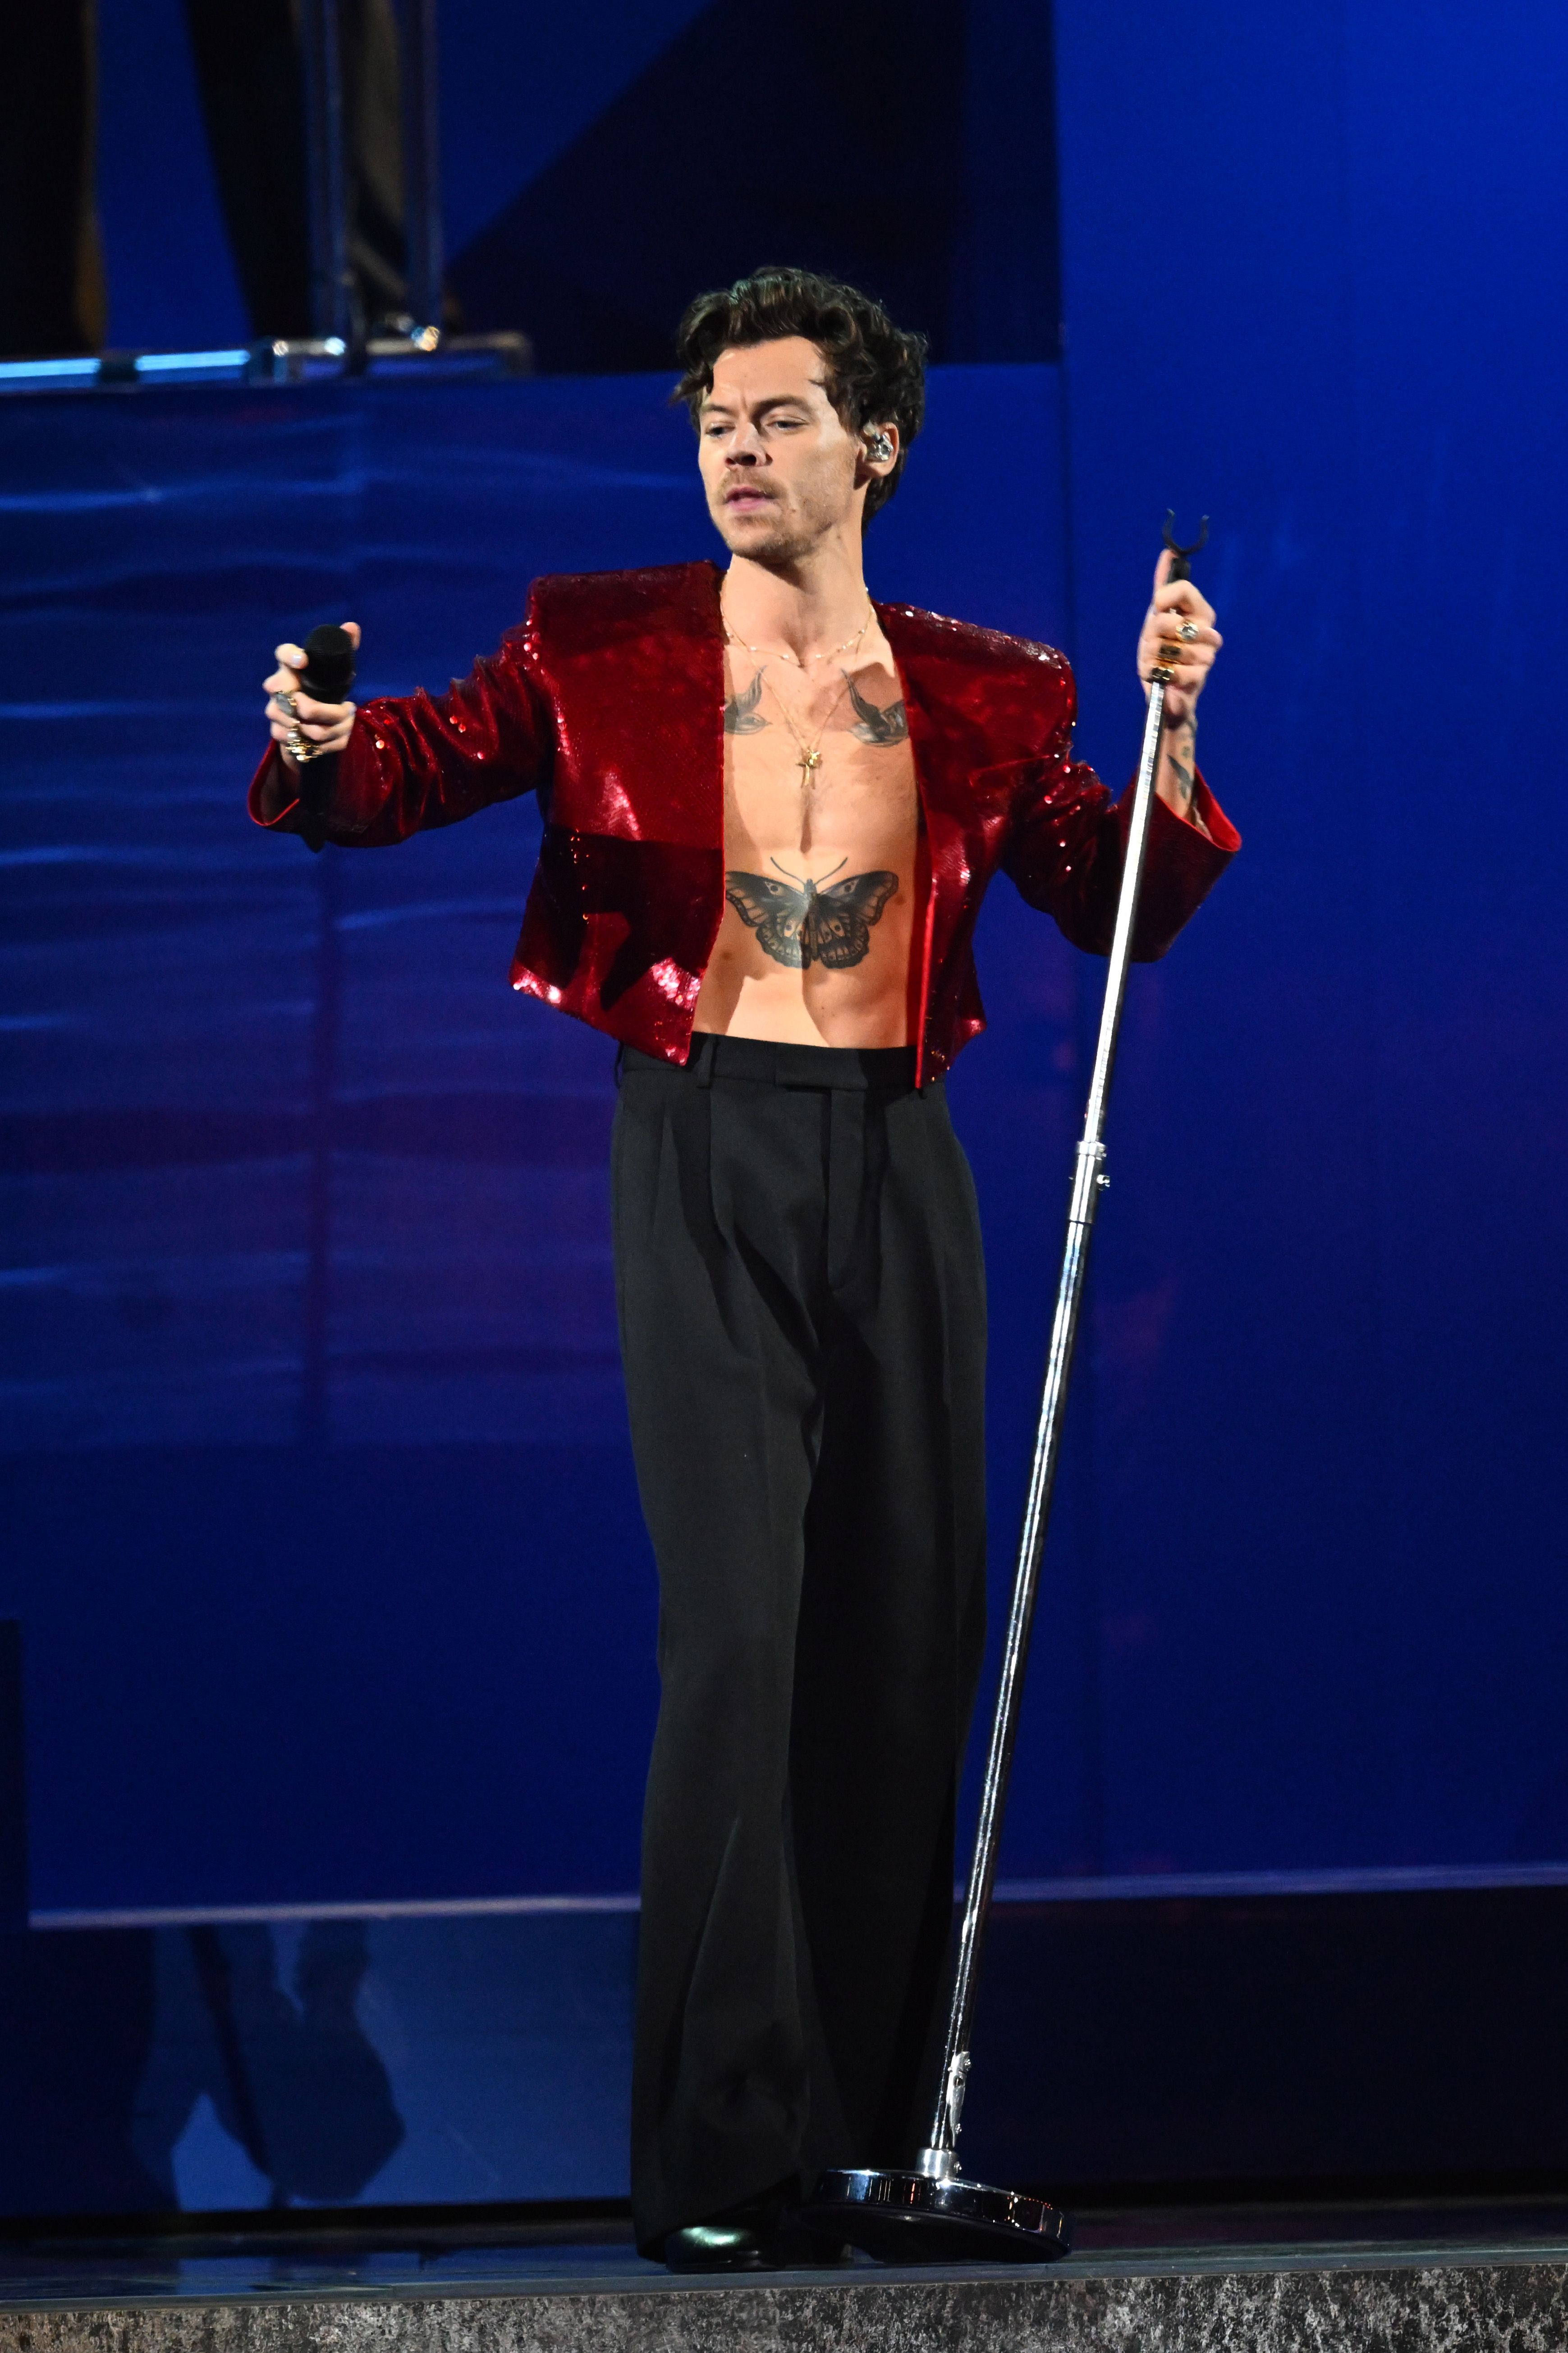 https://hips.hearstapps.com/hmg-prod/images/harry-styles-performs-on-stage-during-the-brit-awards-2023-news-photo-1689000162.jpg